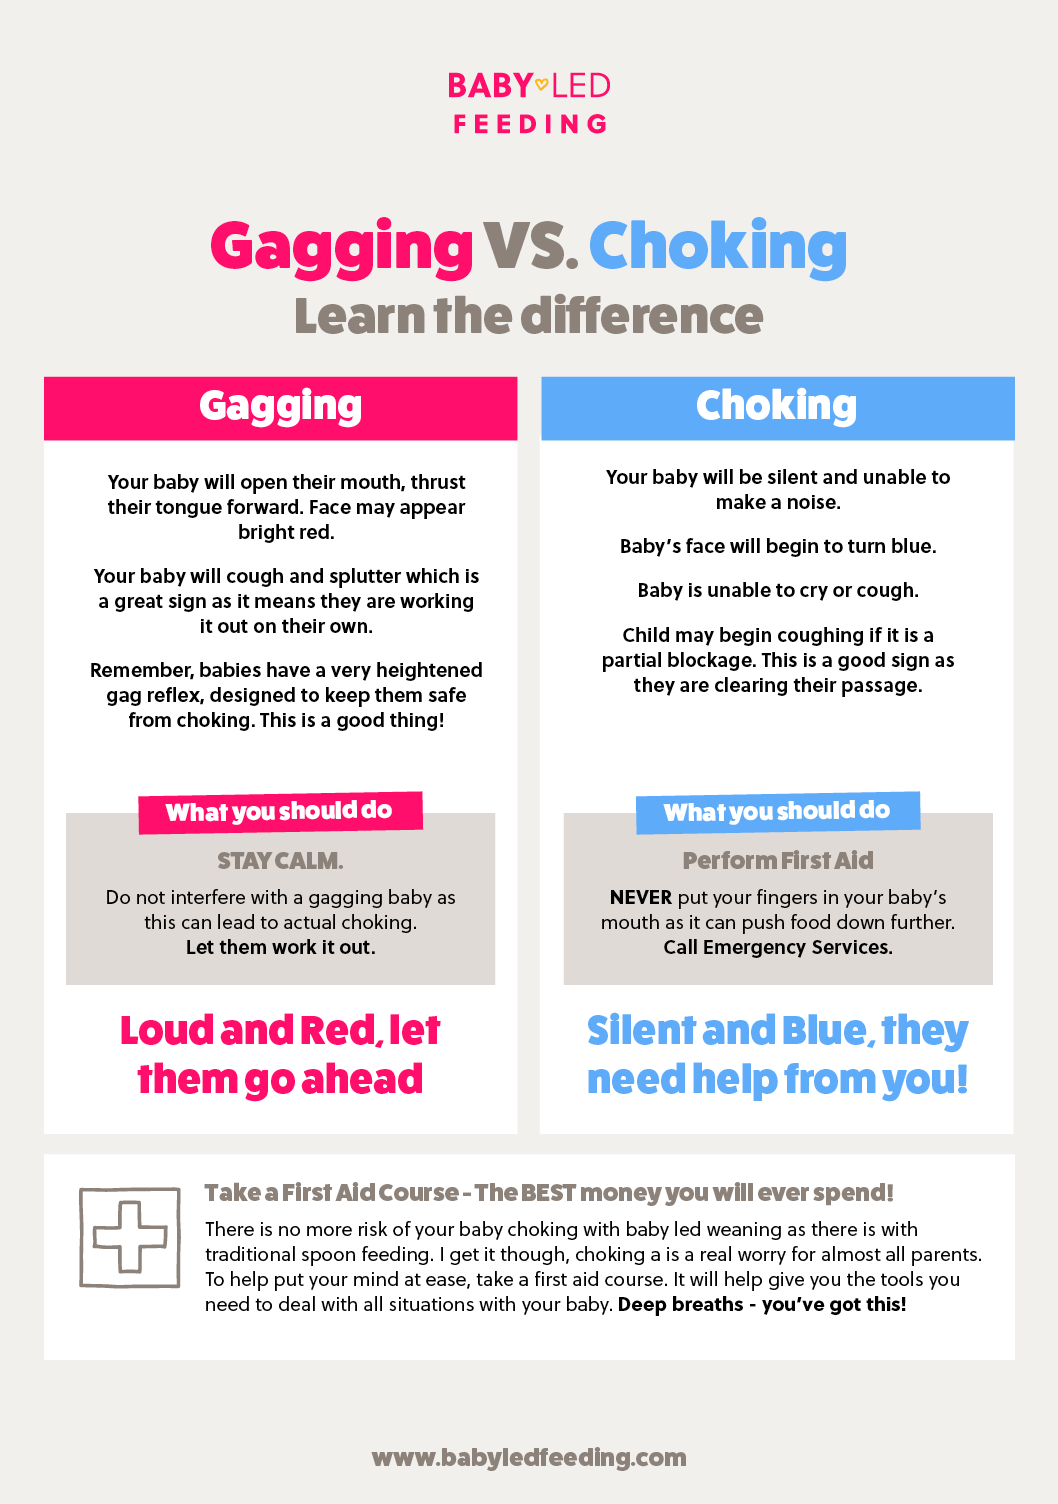 https://www.babyledfeeding.com/wp-content/uploads/2021/05/Gagging-vs-Choking-Baby-Led-Weaning-Infographic.png